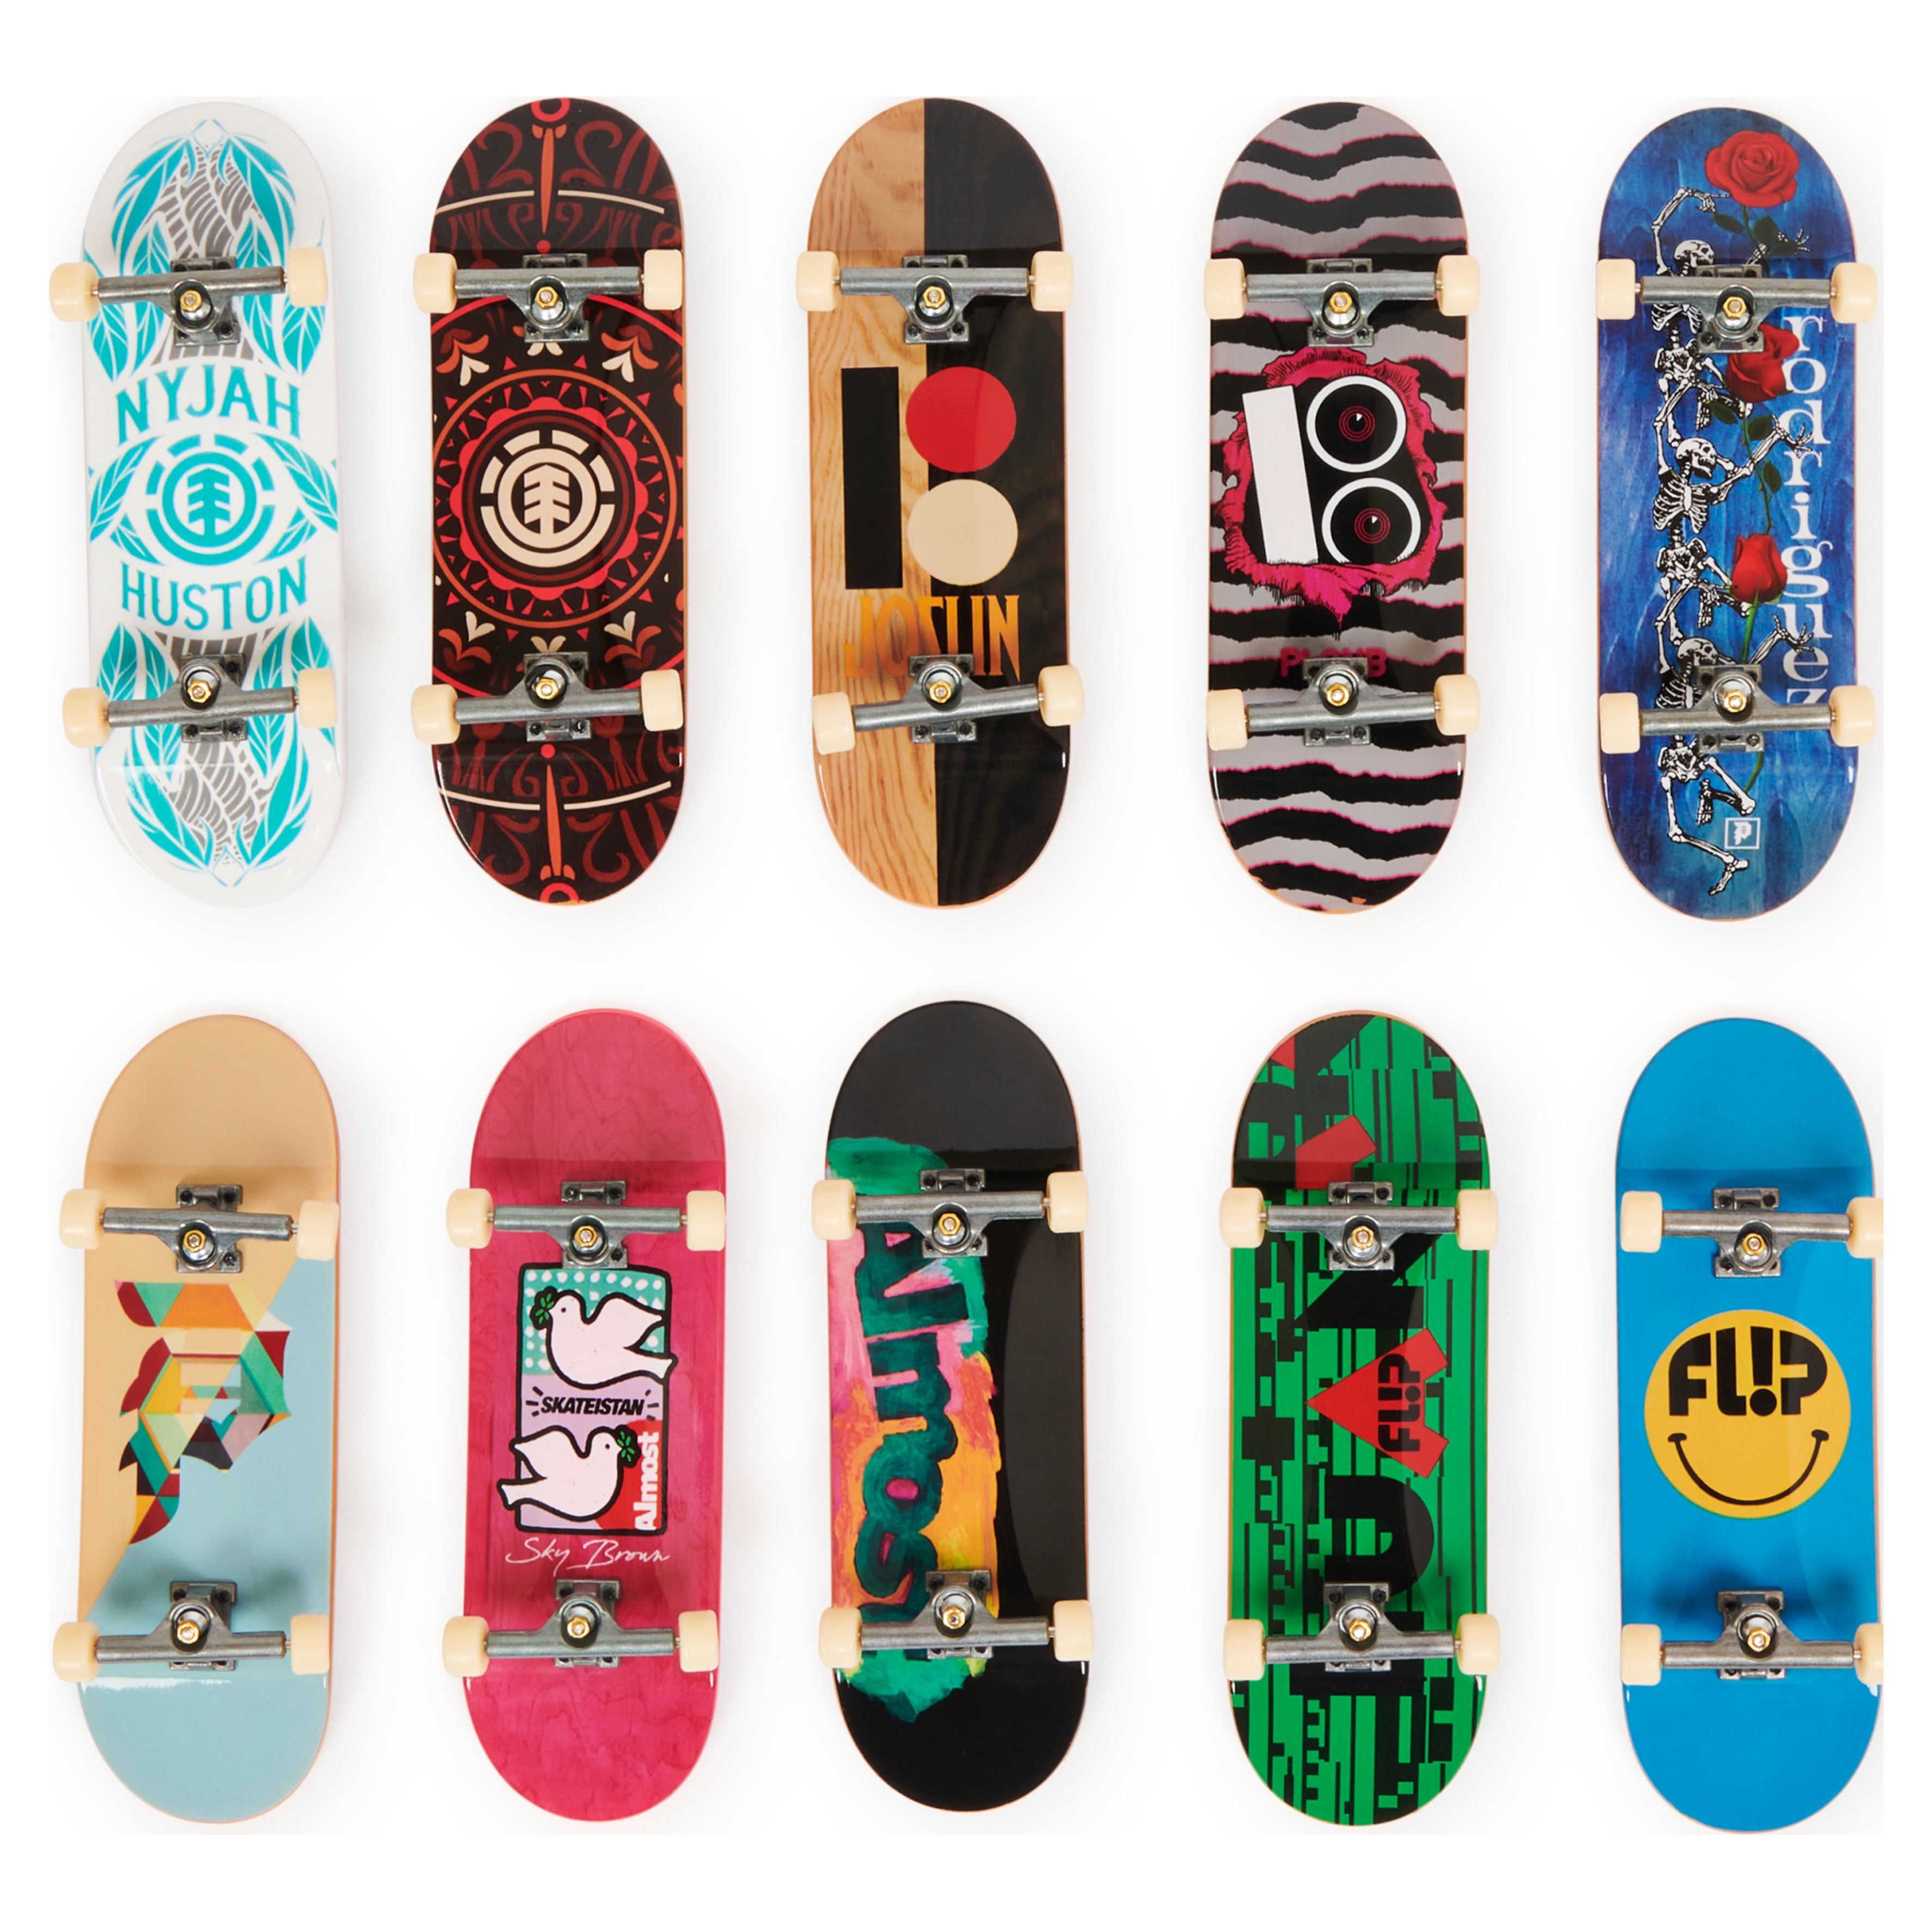 Tech Deck, DLX Pro 10-Pack of Collectible Fingerboards, For Skate Lovers, Kids Toy for  Ages 6 and up - image 1 of 7